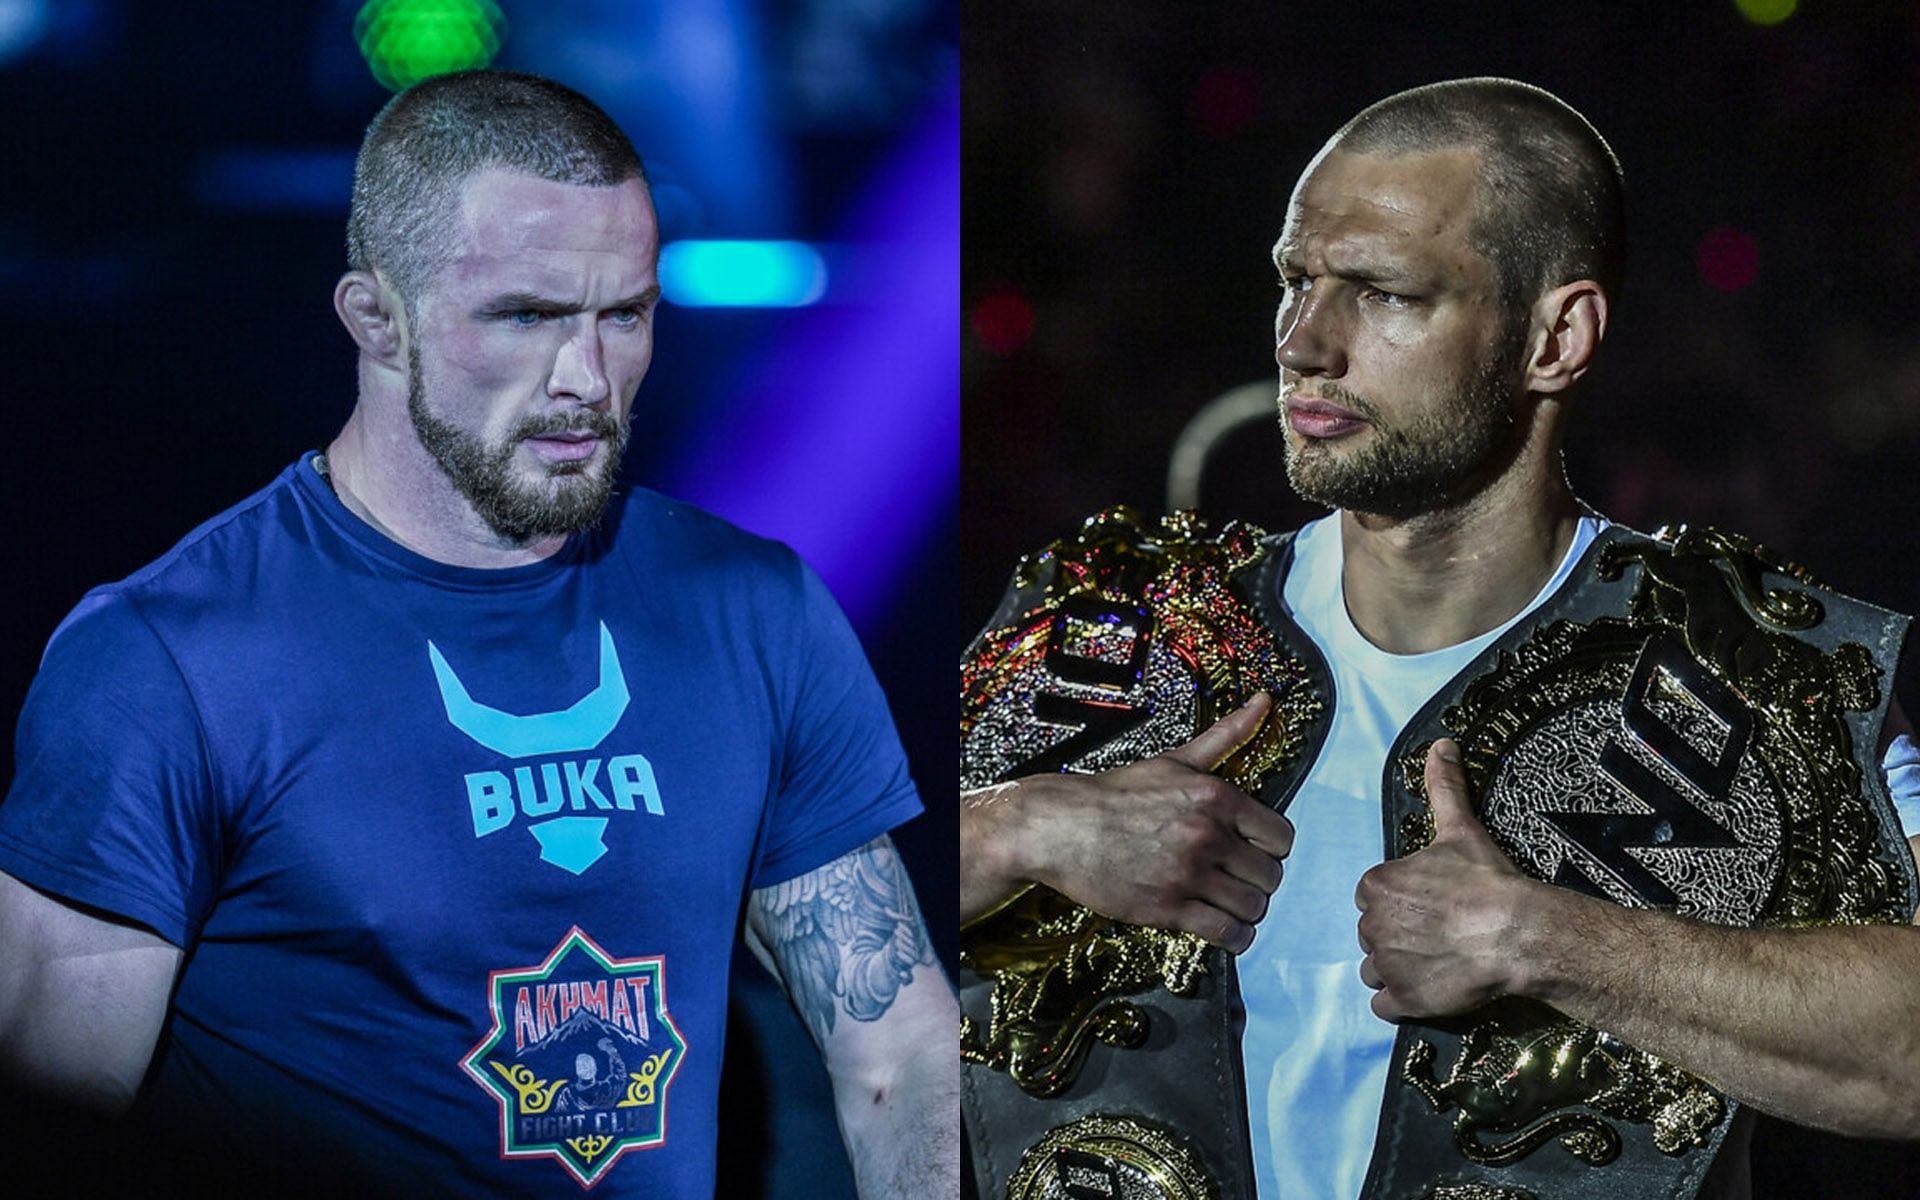 Reinier de Ridder (R) believes Vitaly Bigdash (L) should be the next one up for the ONE middleweight world title. | [Photos: ONE Championship]